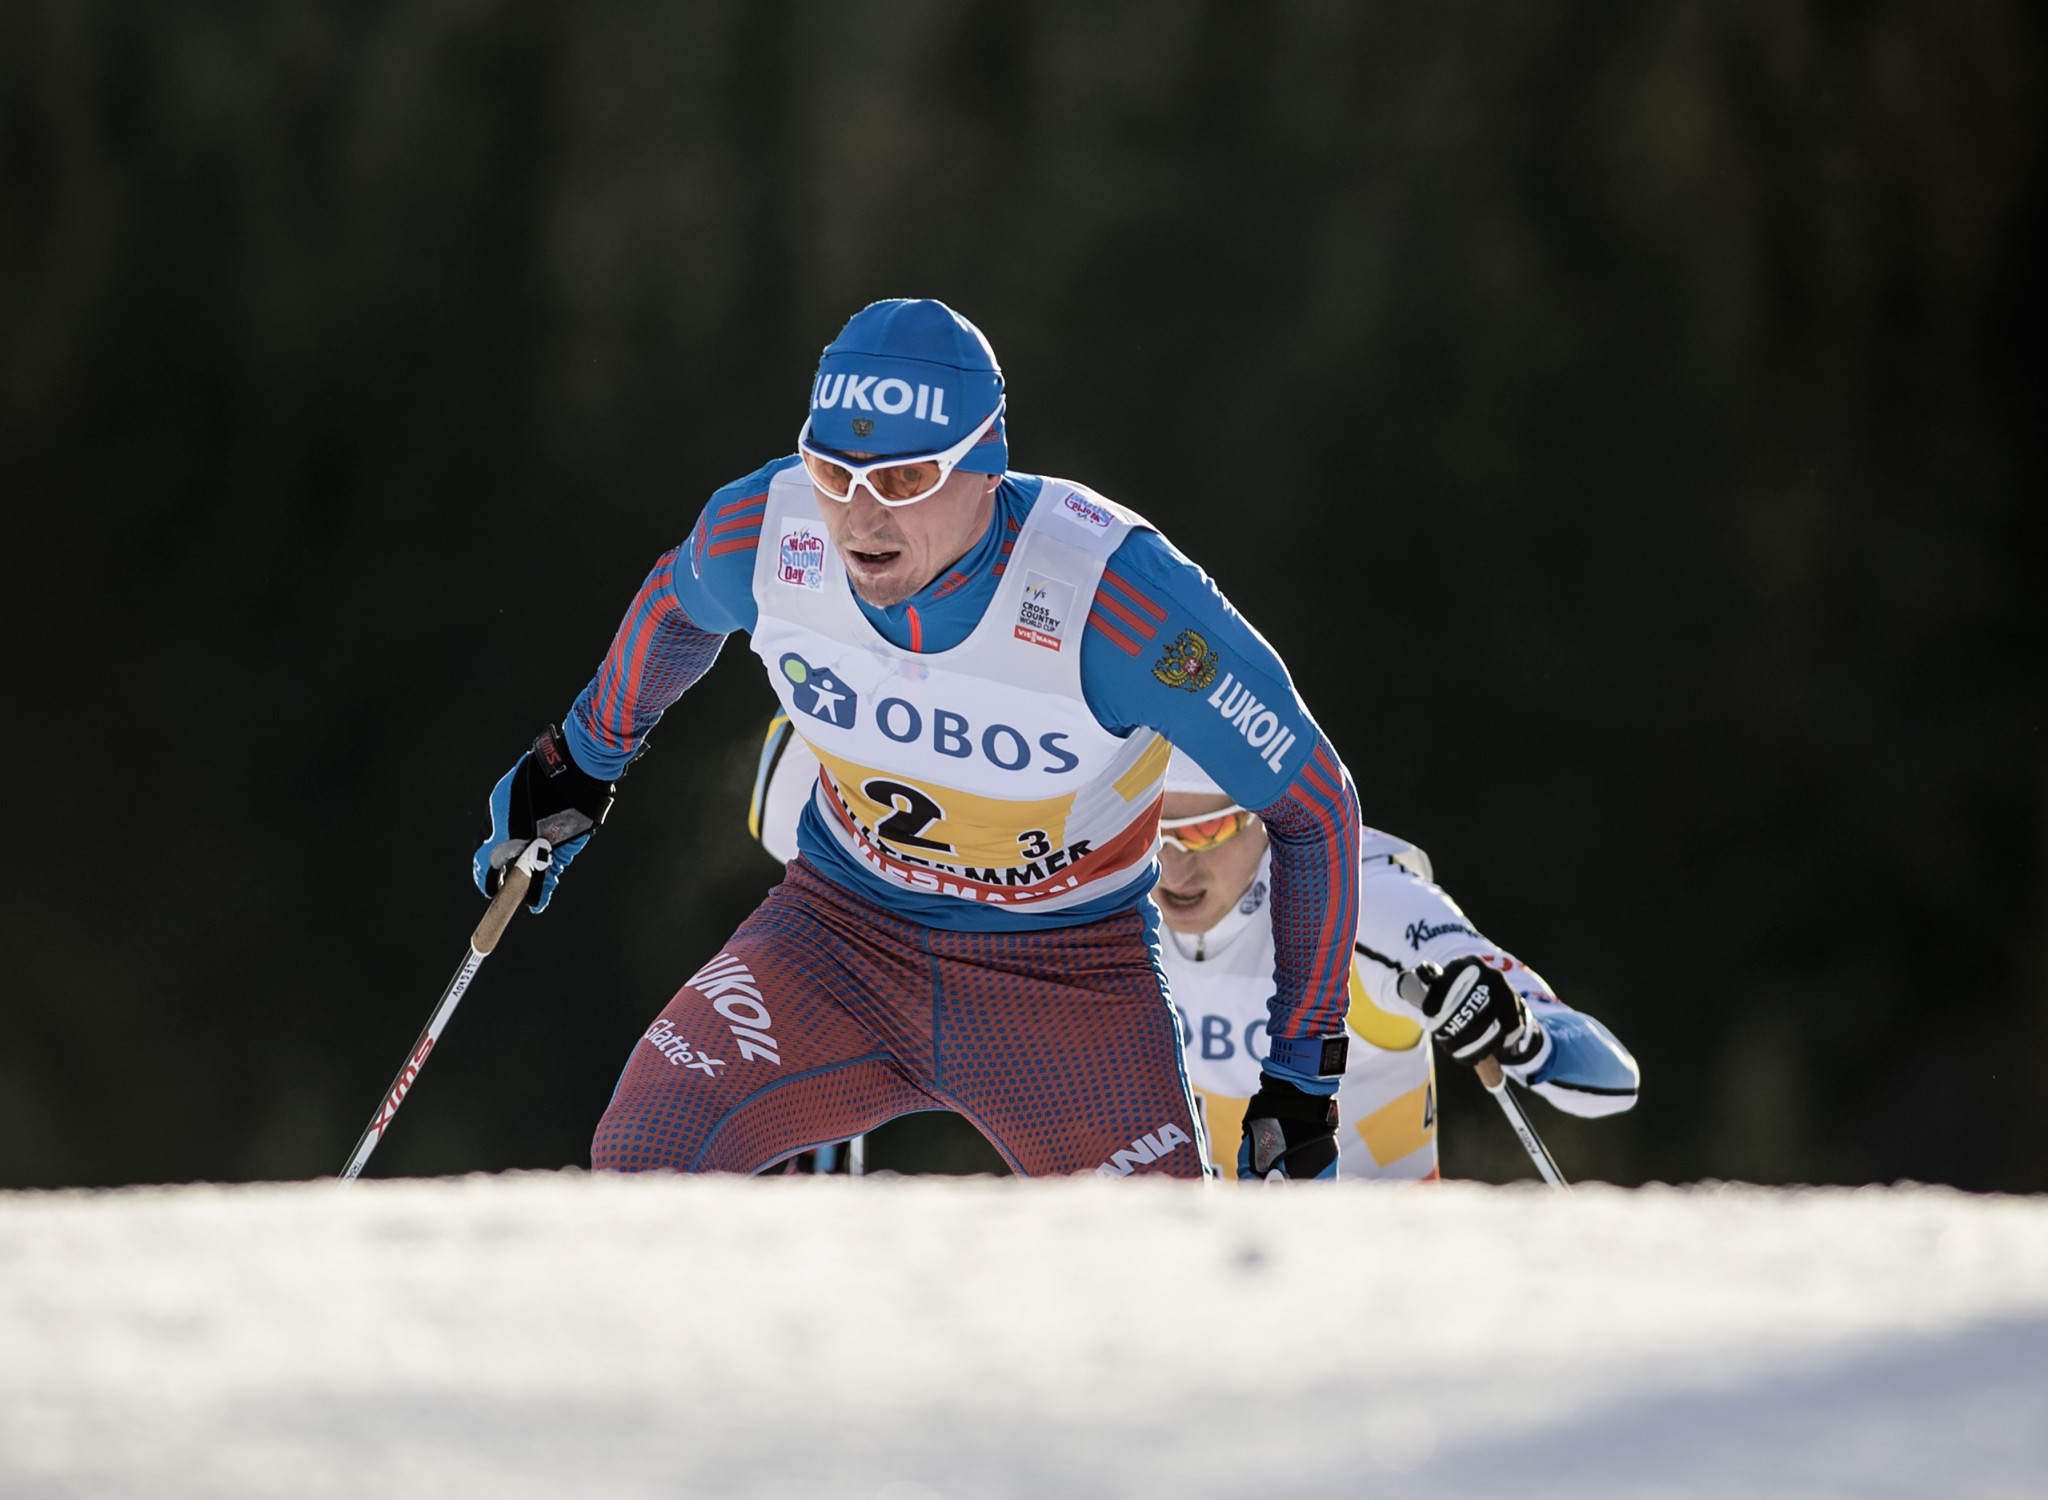 The disqualification of Russian skiers, including Alexander Legkov last week, left more questions than answers ©Getty Images